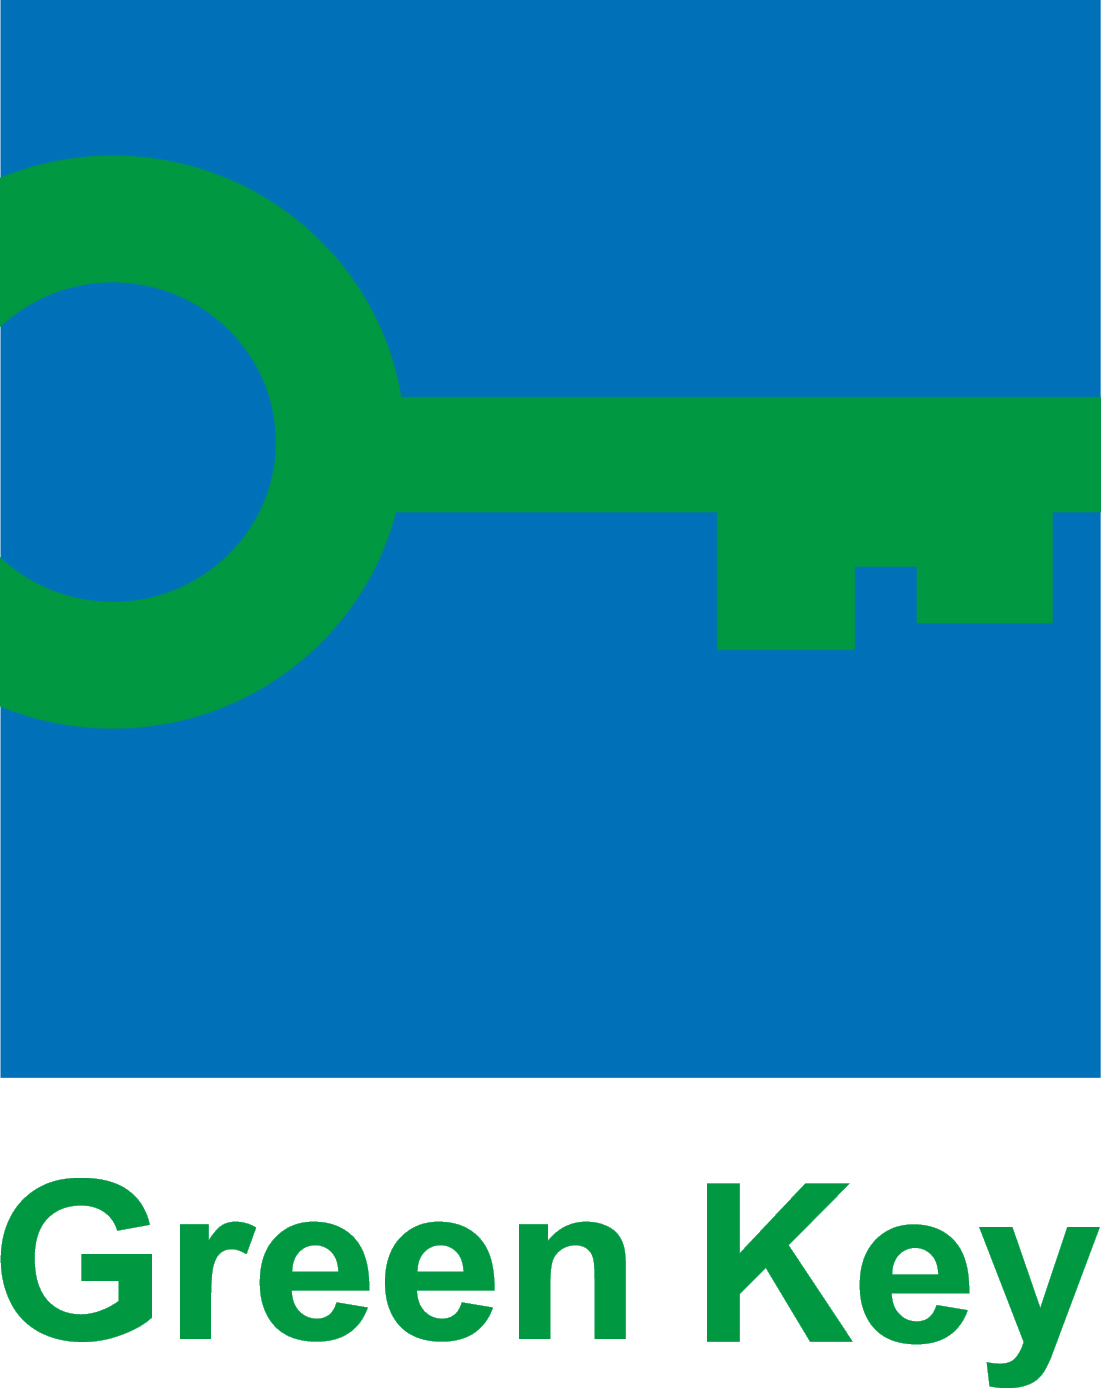 Green Key logo in color with text